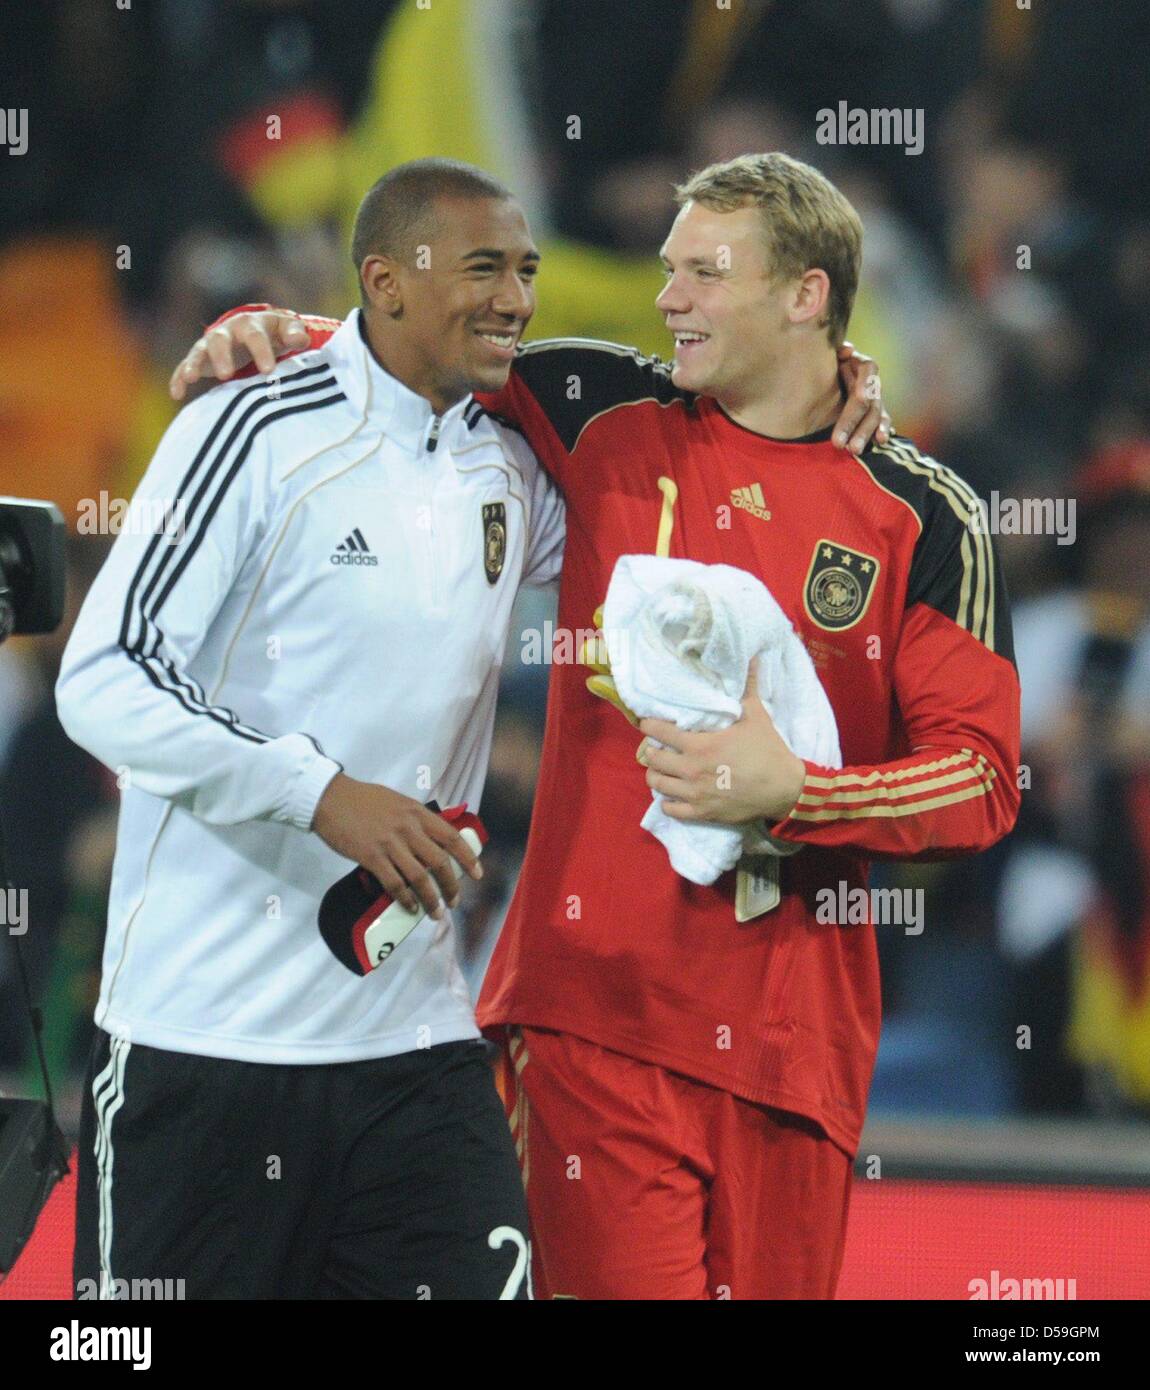 Jerome Boateng (L) and goalkeeper Manuel Neuer of Germany celebrate after the final whistle oft the FIFA World Cup 2010 group D match between Ghana and Germany at the Soccer City Stadium in Johannesburg, South Africa 23 June 2010. Photo: Bernd Weissbrod dpa - Please refer to http://dpaq.de/FIFA-WM2010-TC Stock Photo